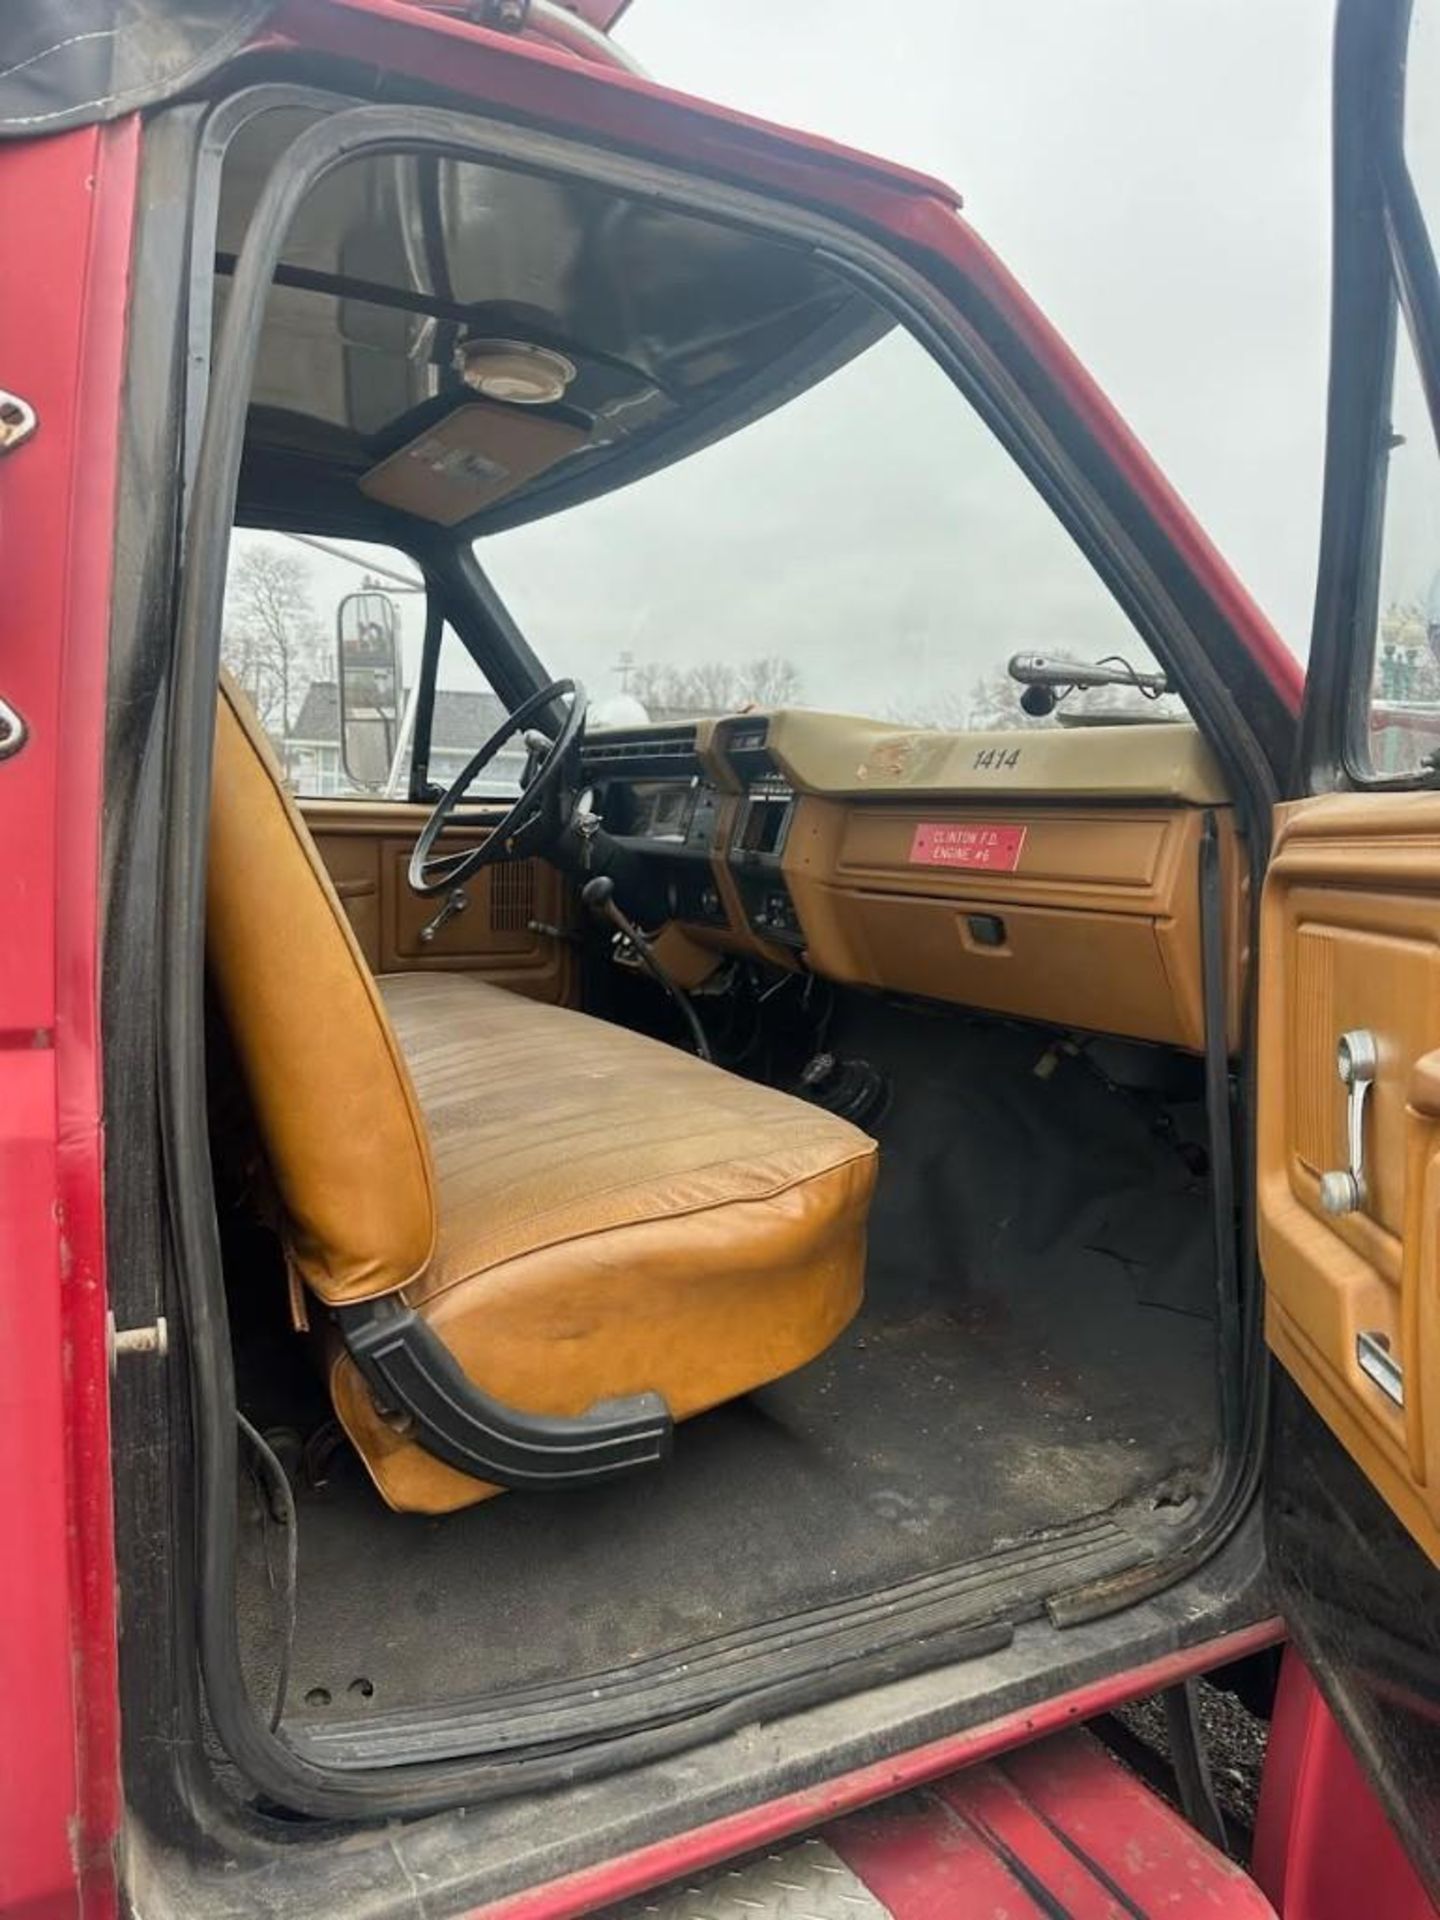 1980 Ford Fire Truck (located off-site, please read description) - Image 11 of 19